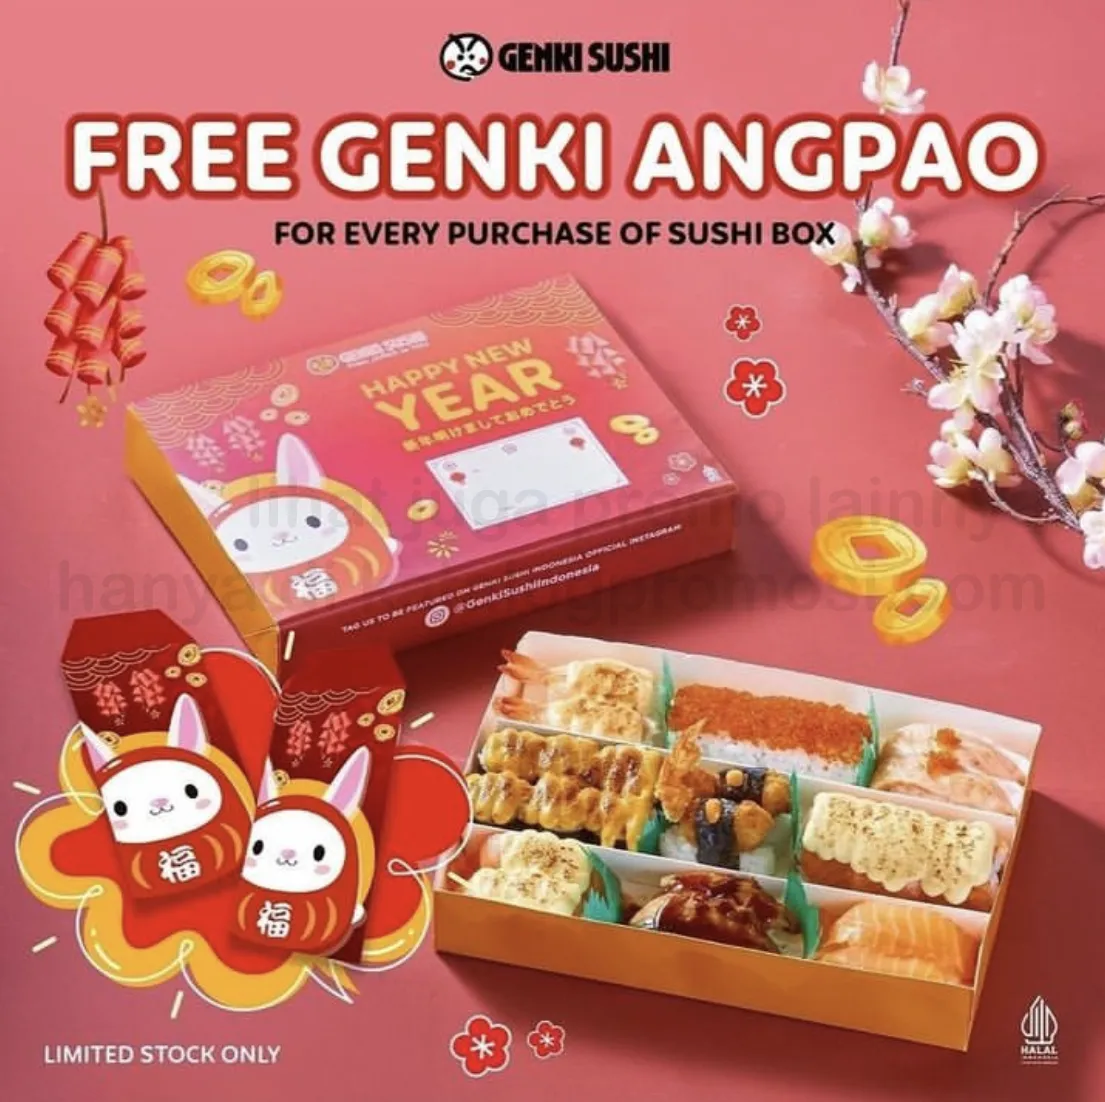 Promo GENKI SUSHI Get Free Angpao for every purchase of Sushi Box